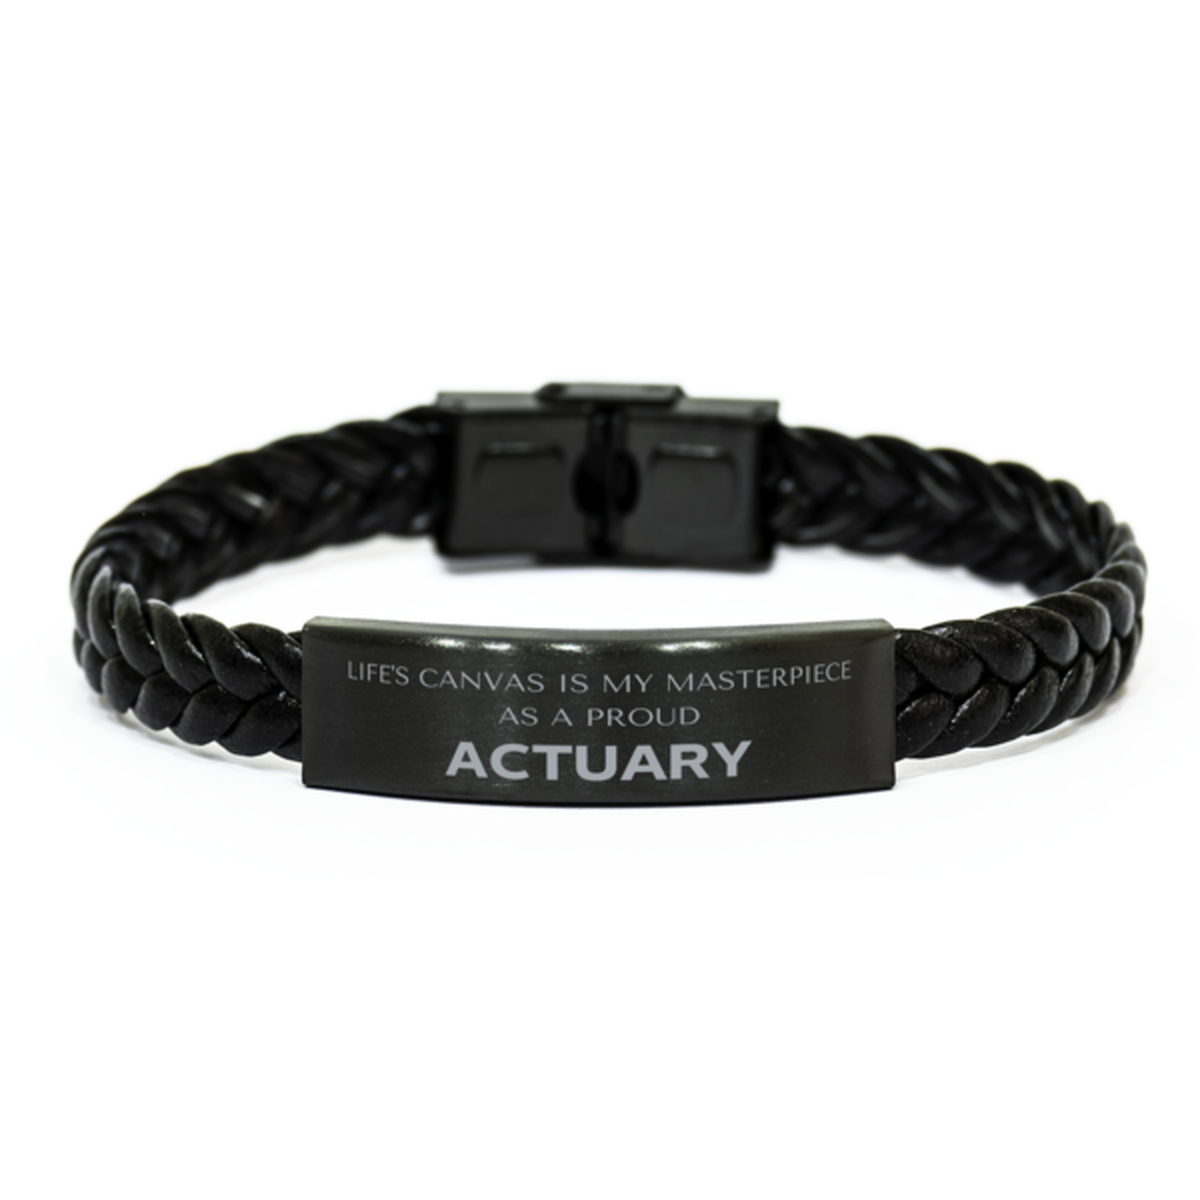 Proud Actuary Gifts, Life's canvas is my masterpiece, Epic Birthday Christmas Unique Braided Leather Bracelet For Actuary, Coworkers, Men, Women, Friends